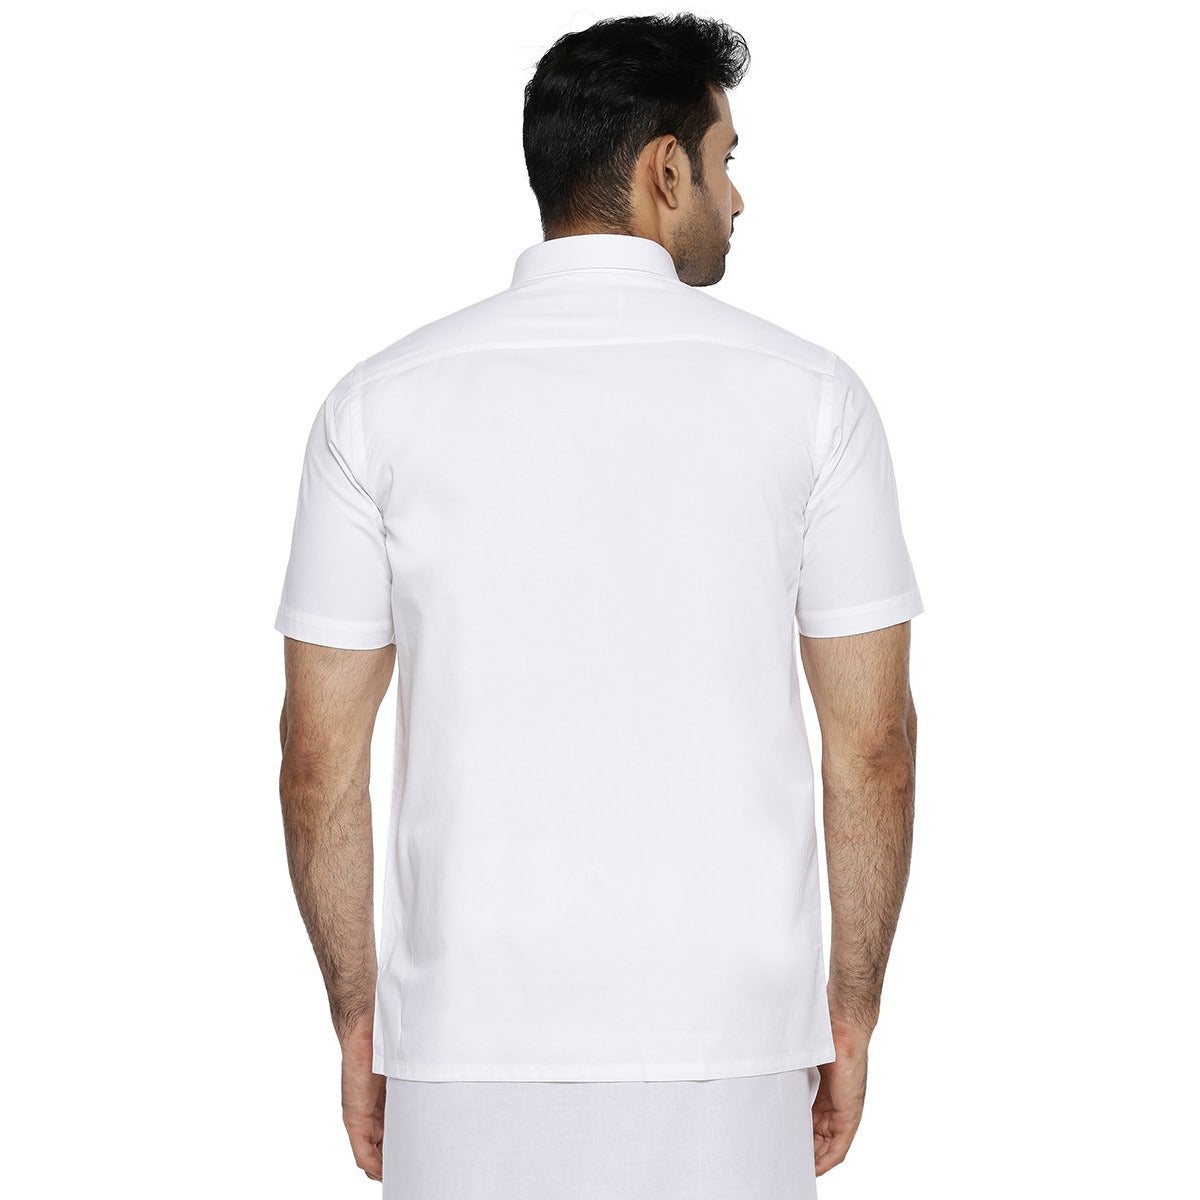 Mens 100% Cotton Half Sleeves White Shirt Super Faast -Back view